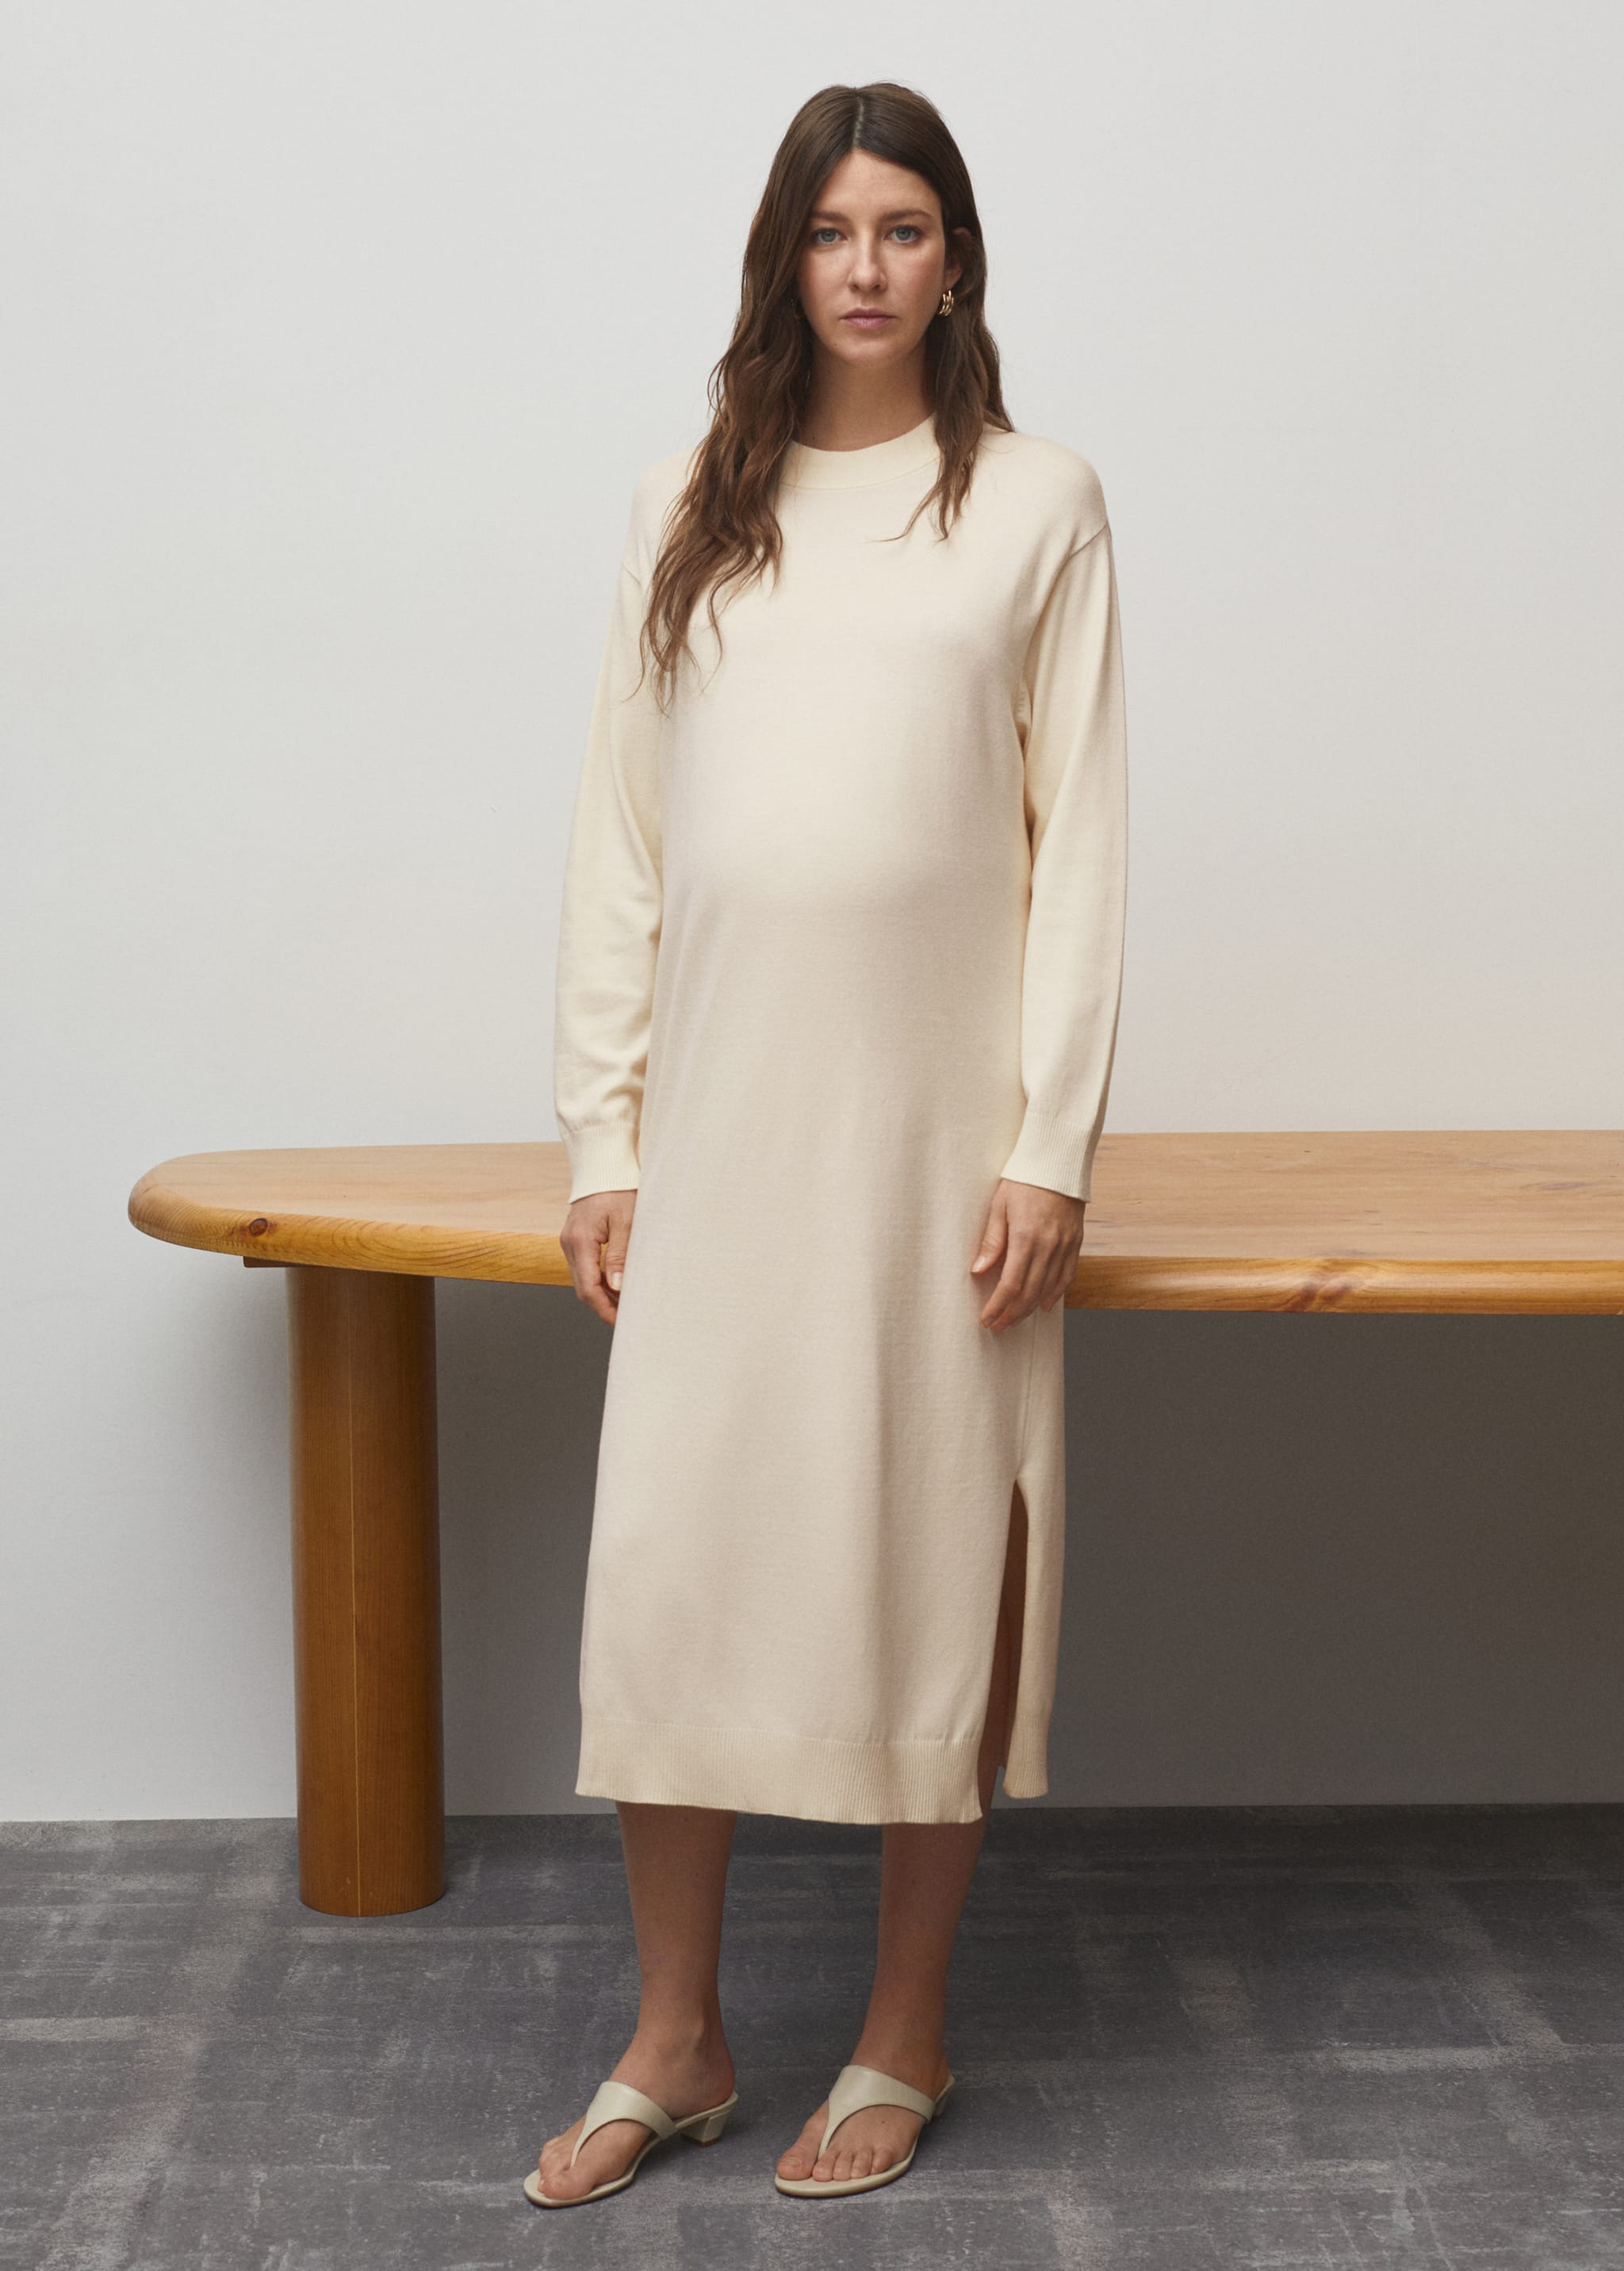 Round-neck knitted dress - General plane